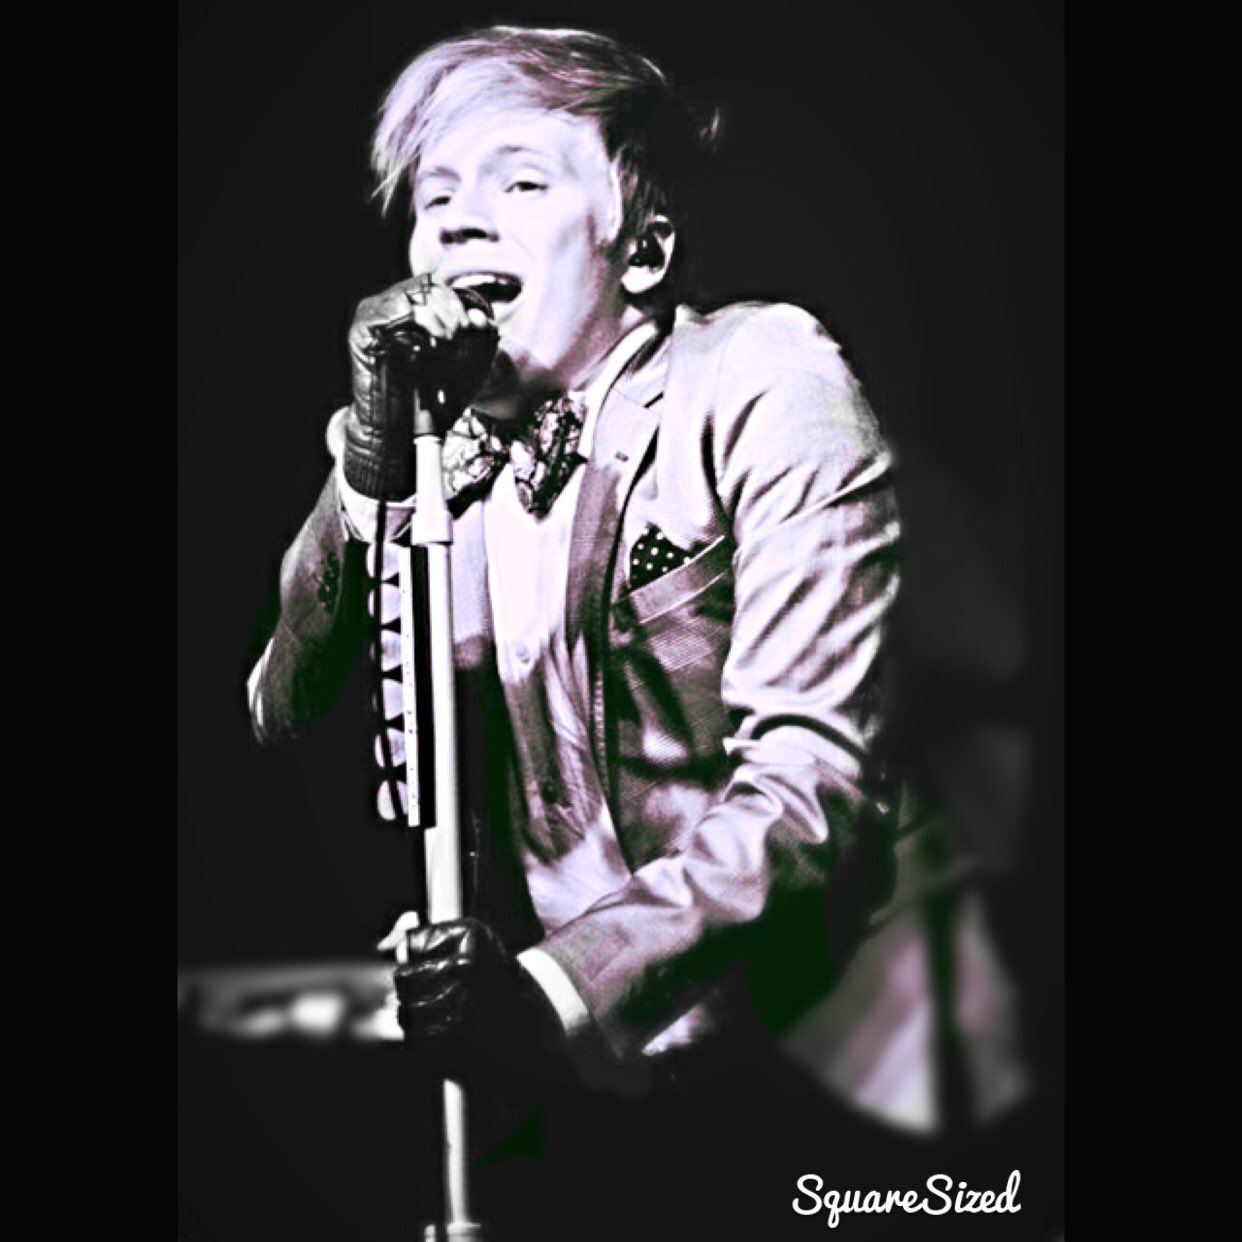 HAPPY BIRTHDAY TO THE ONE AND ONLY MAN WITH THE SOUL VOICE Patrick stump    